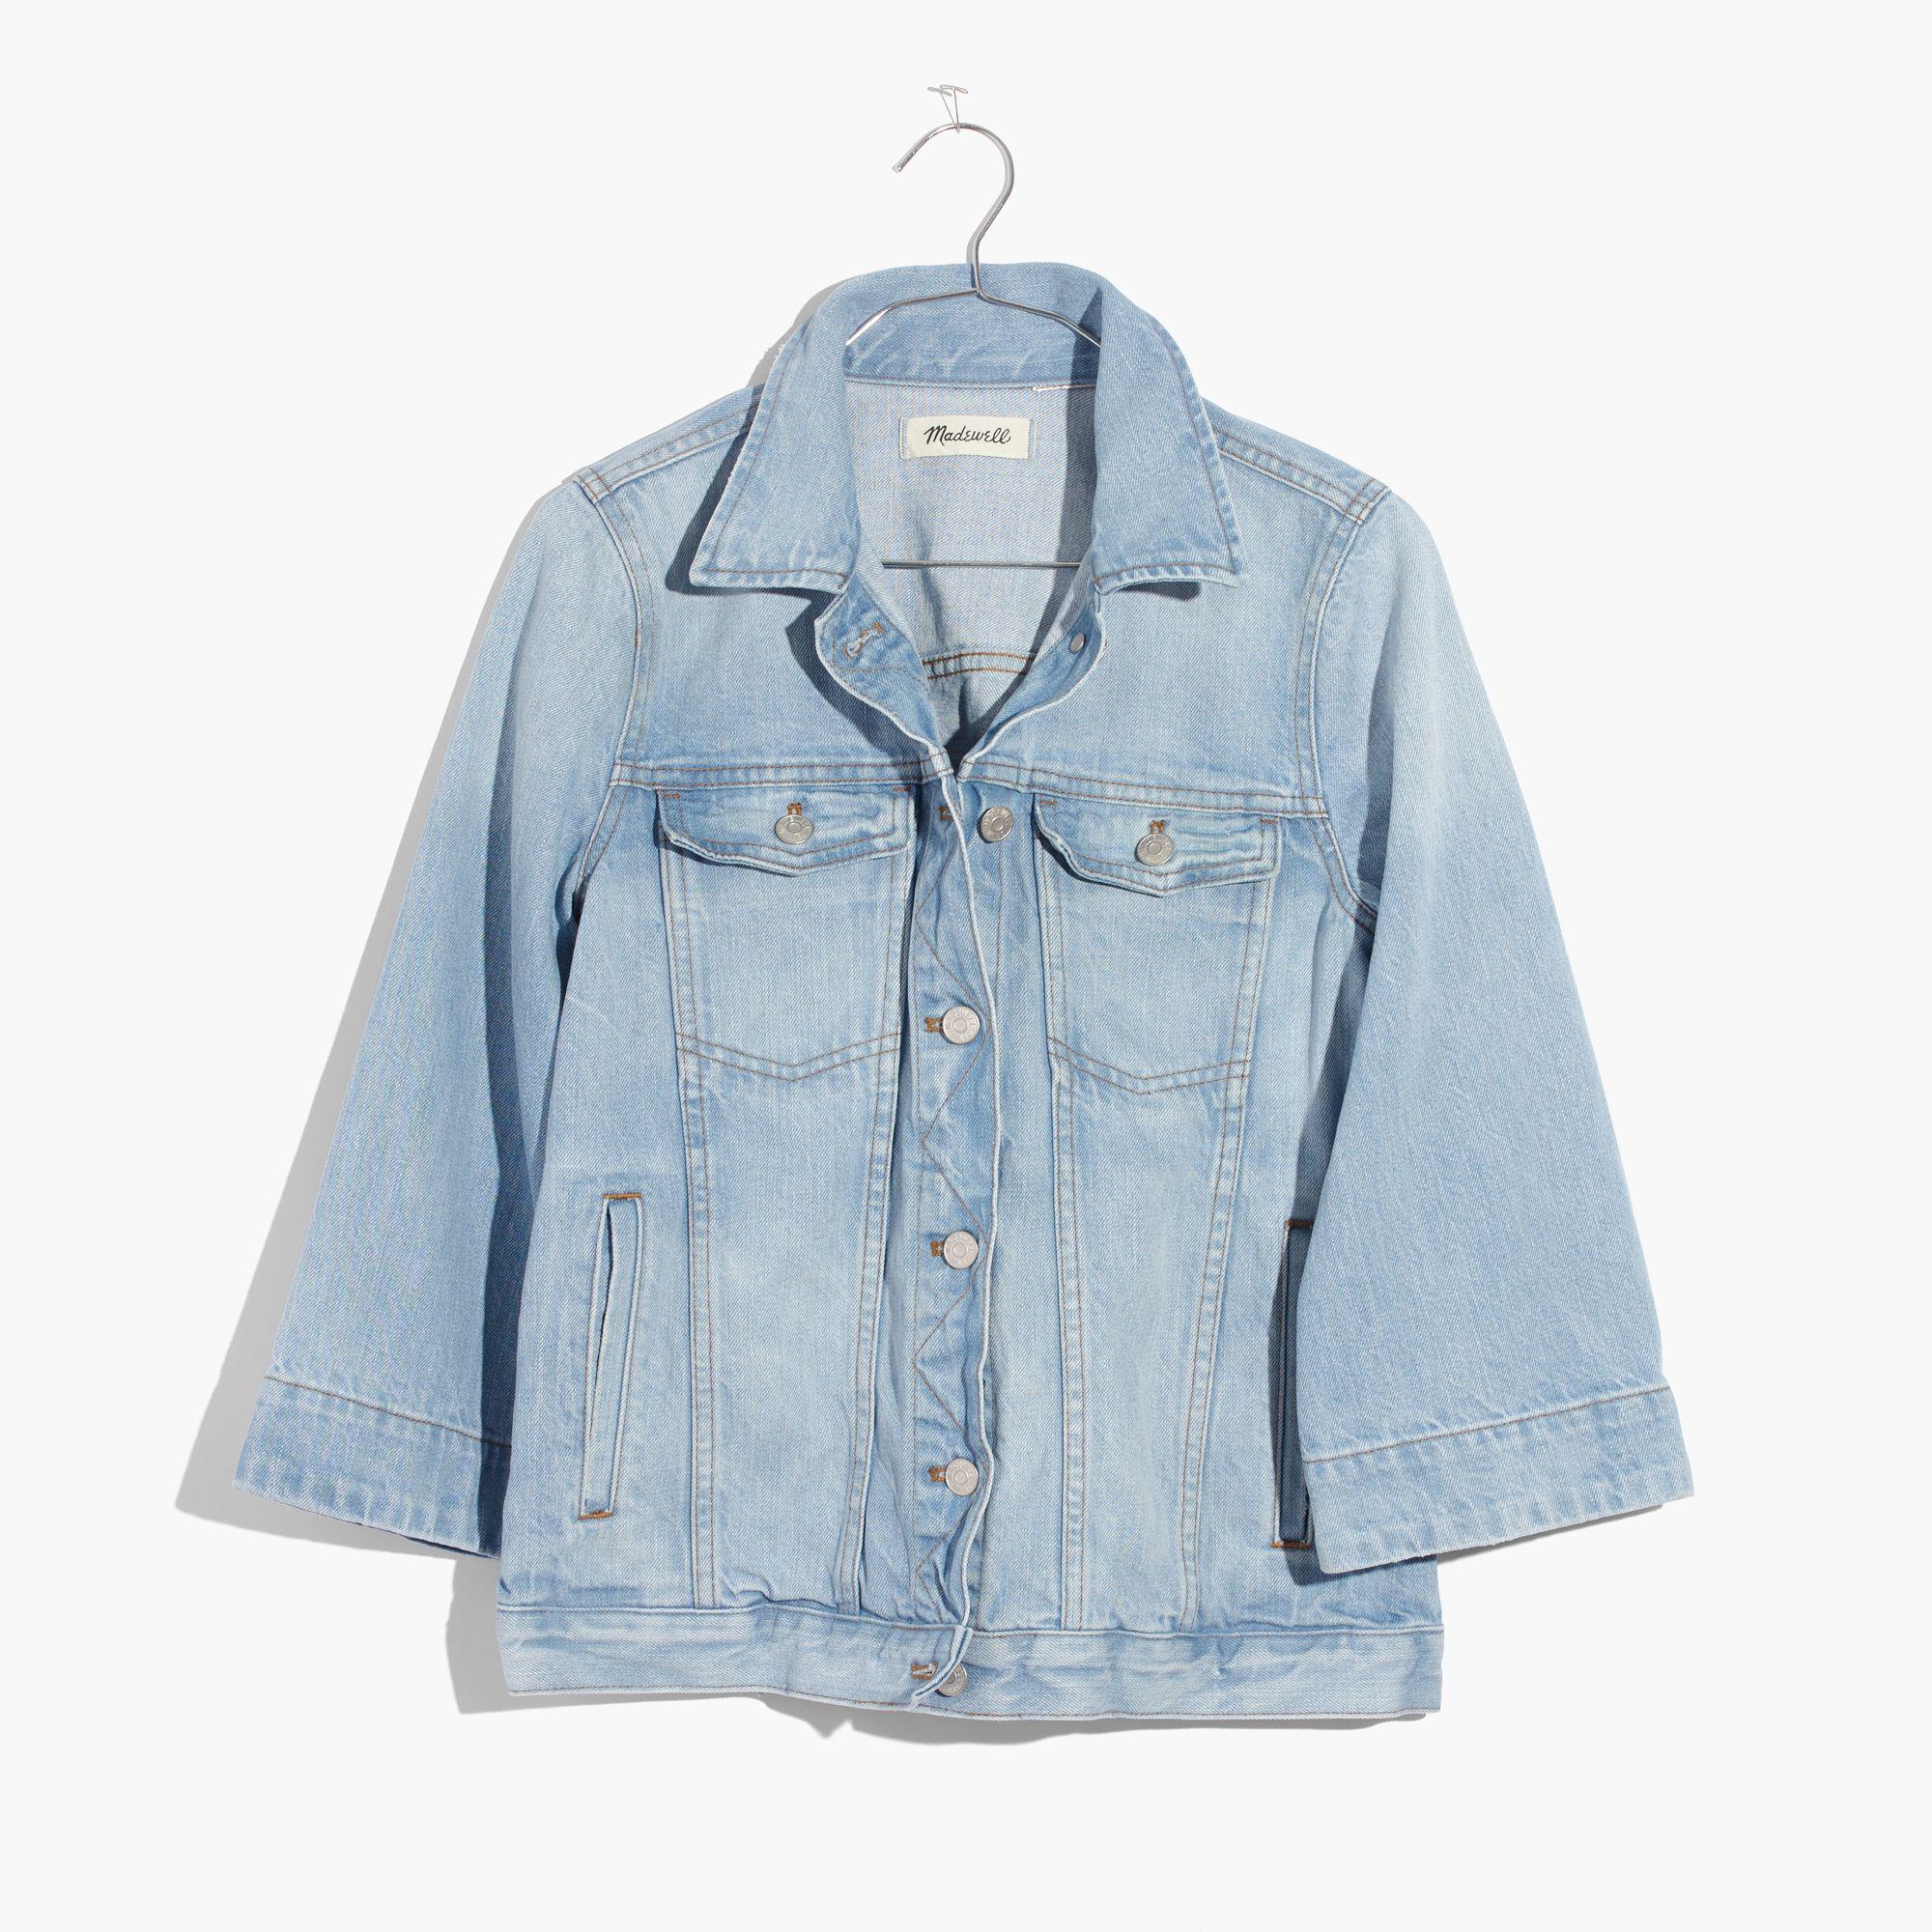 Madewell Cotton Bell-sleeve Jean Jacket in Blue - Lyst